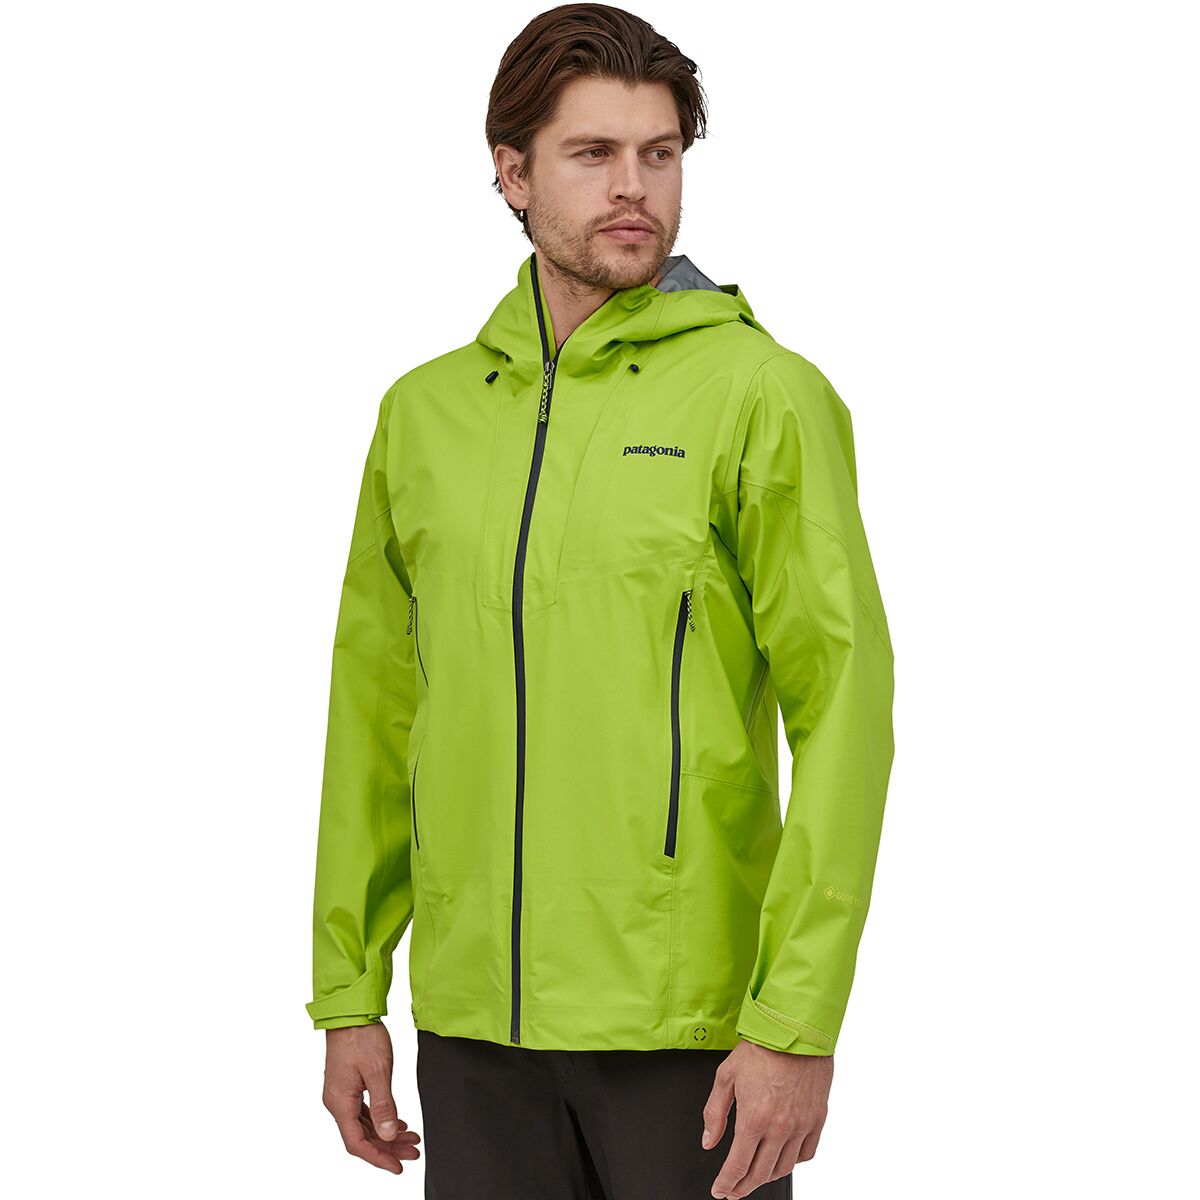 Patagonia Ascensionist Jacket Reviews - Trailspace